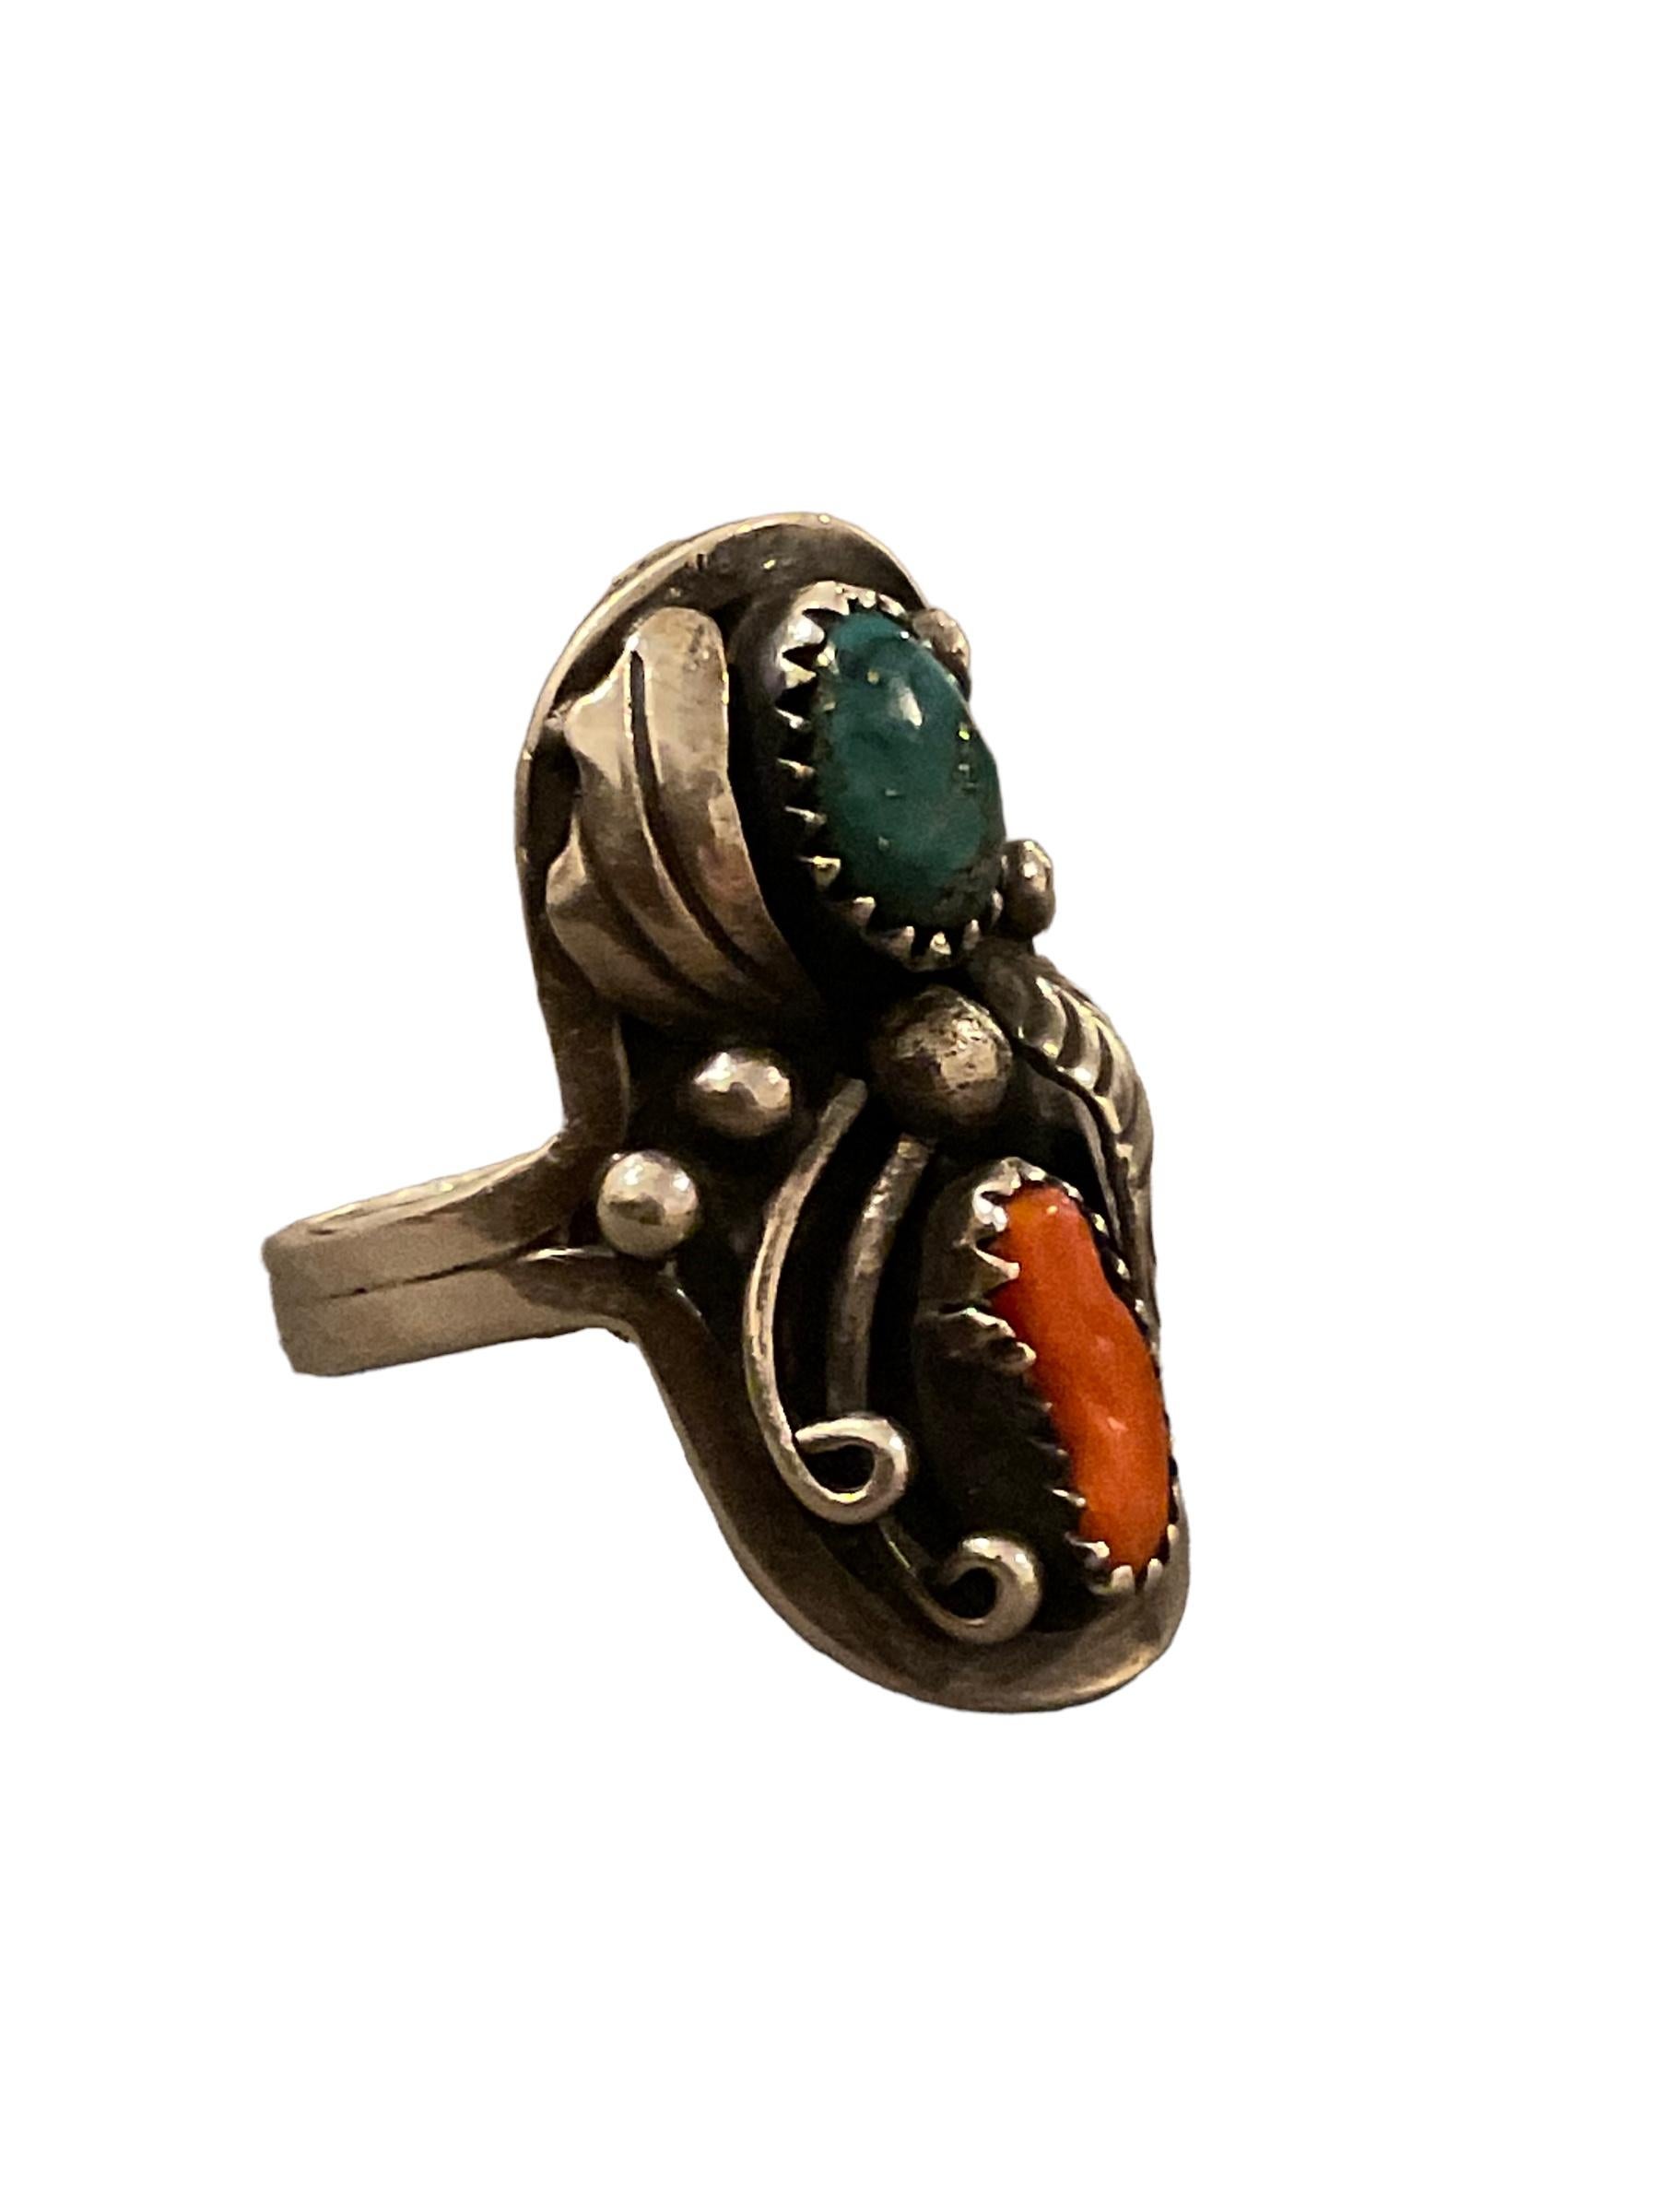 Henry Mariano is a contemporary Navajo silversmith who made a few rings in this style, but when you are a serious collector of Native American jewelry you are aware of the rarity and value of the Turquoise each piece contains. This ring contains